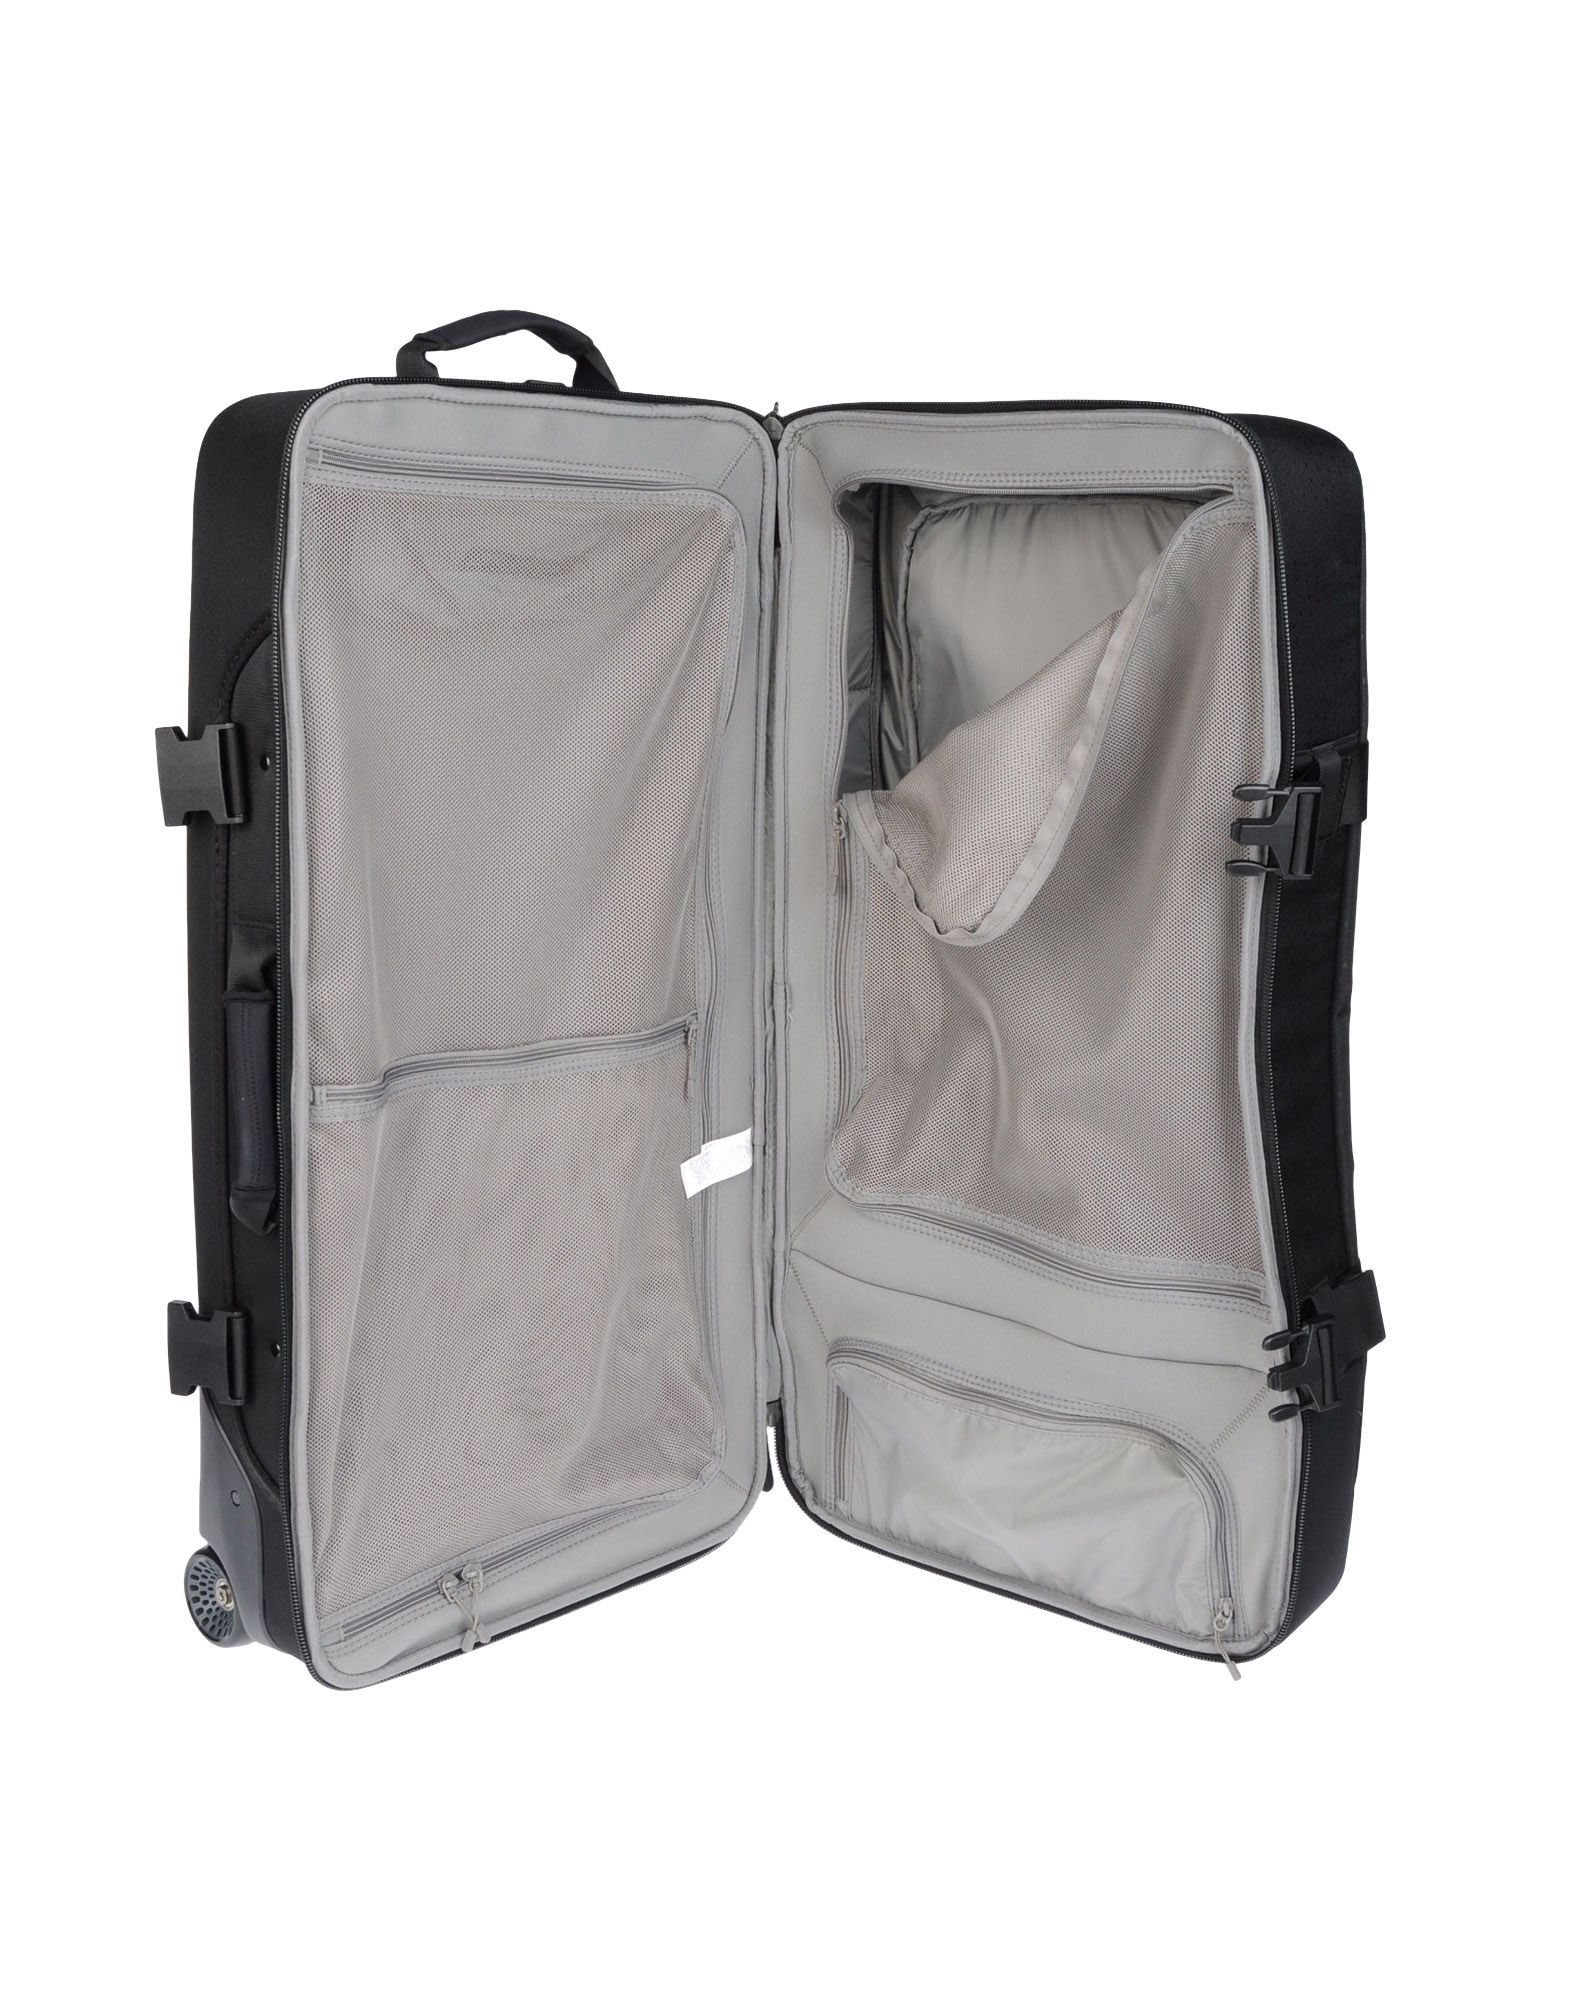 Nike Wheeled Luggage in Black for Men - Lyst